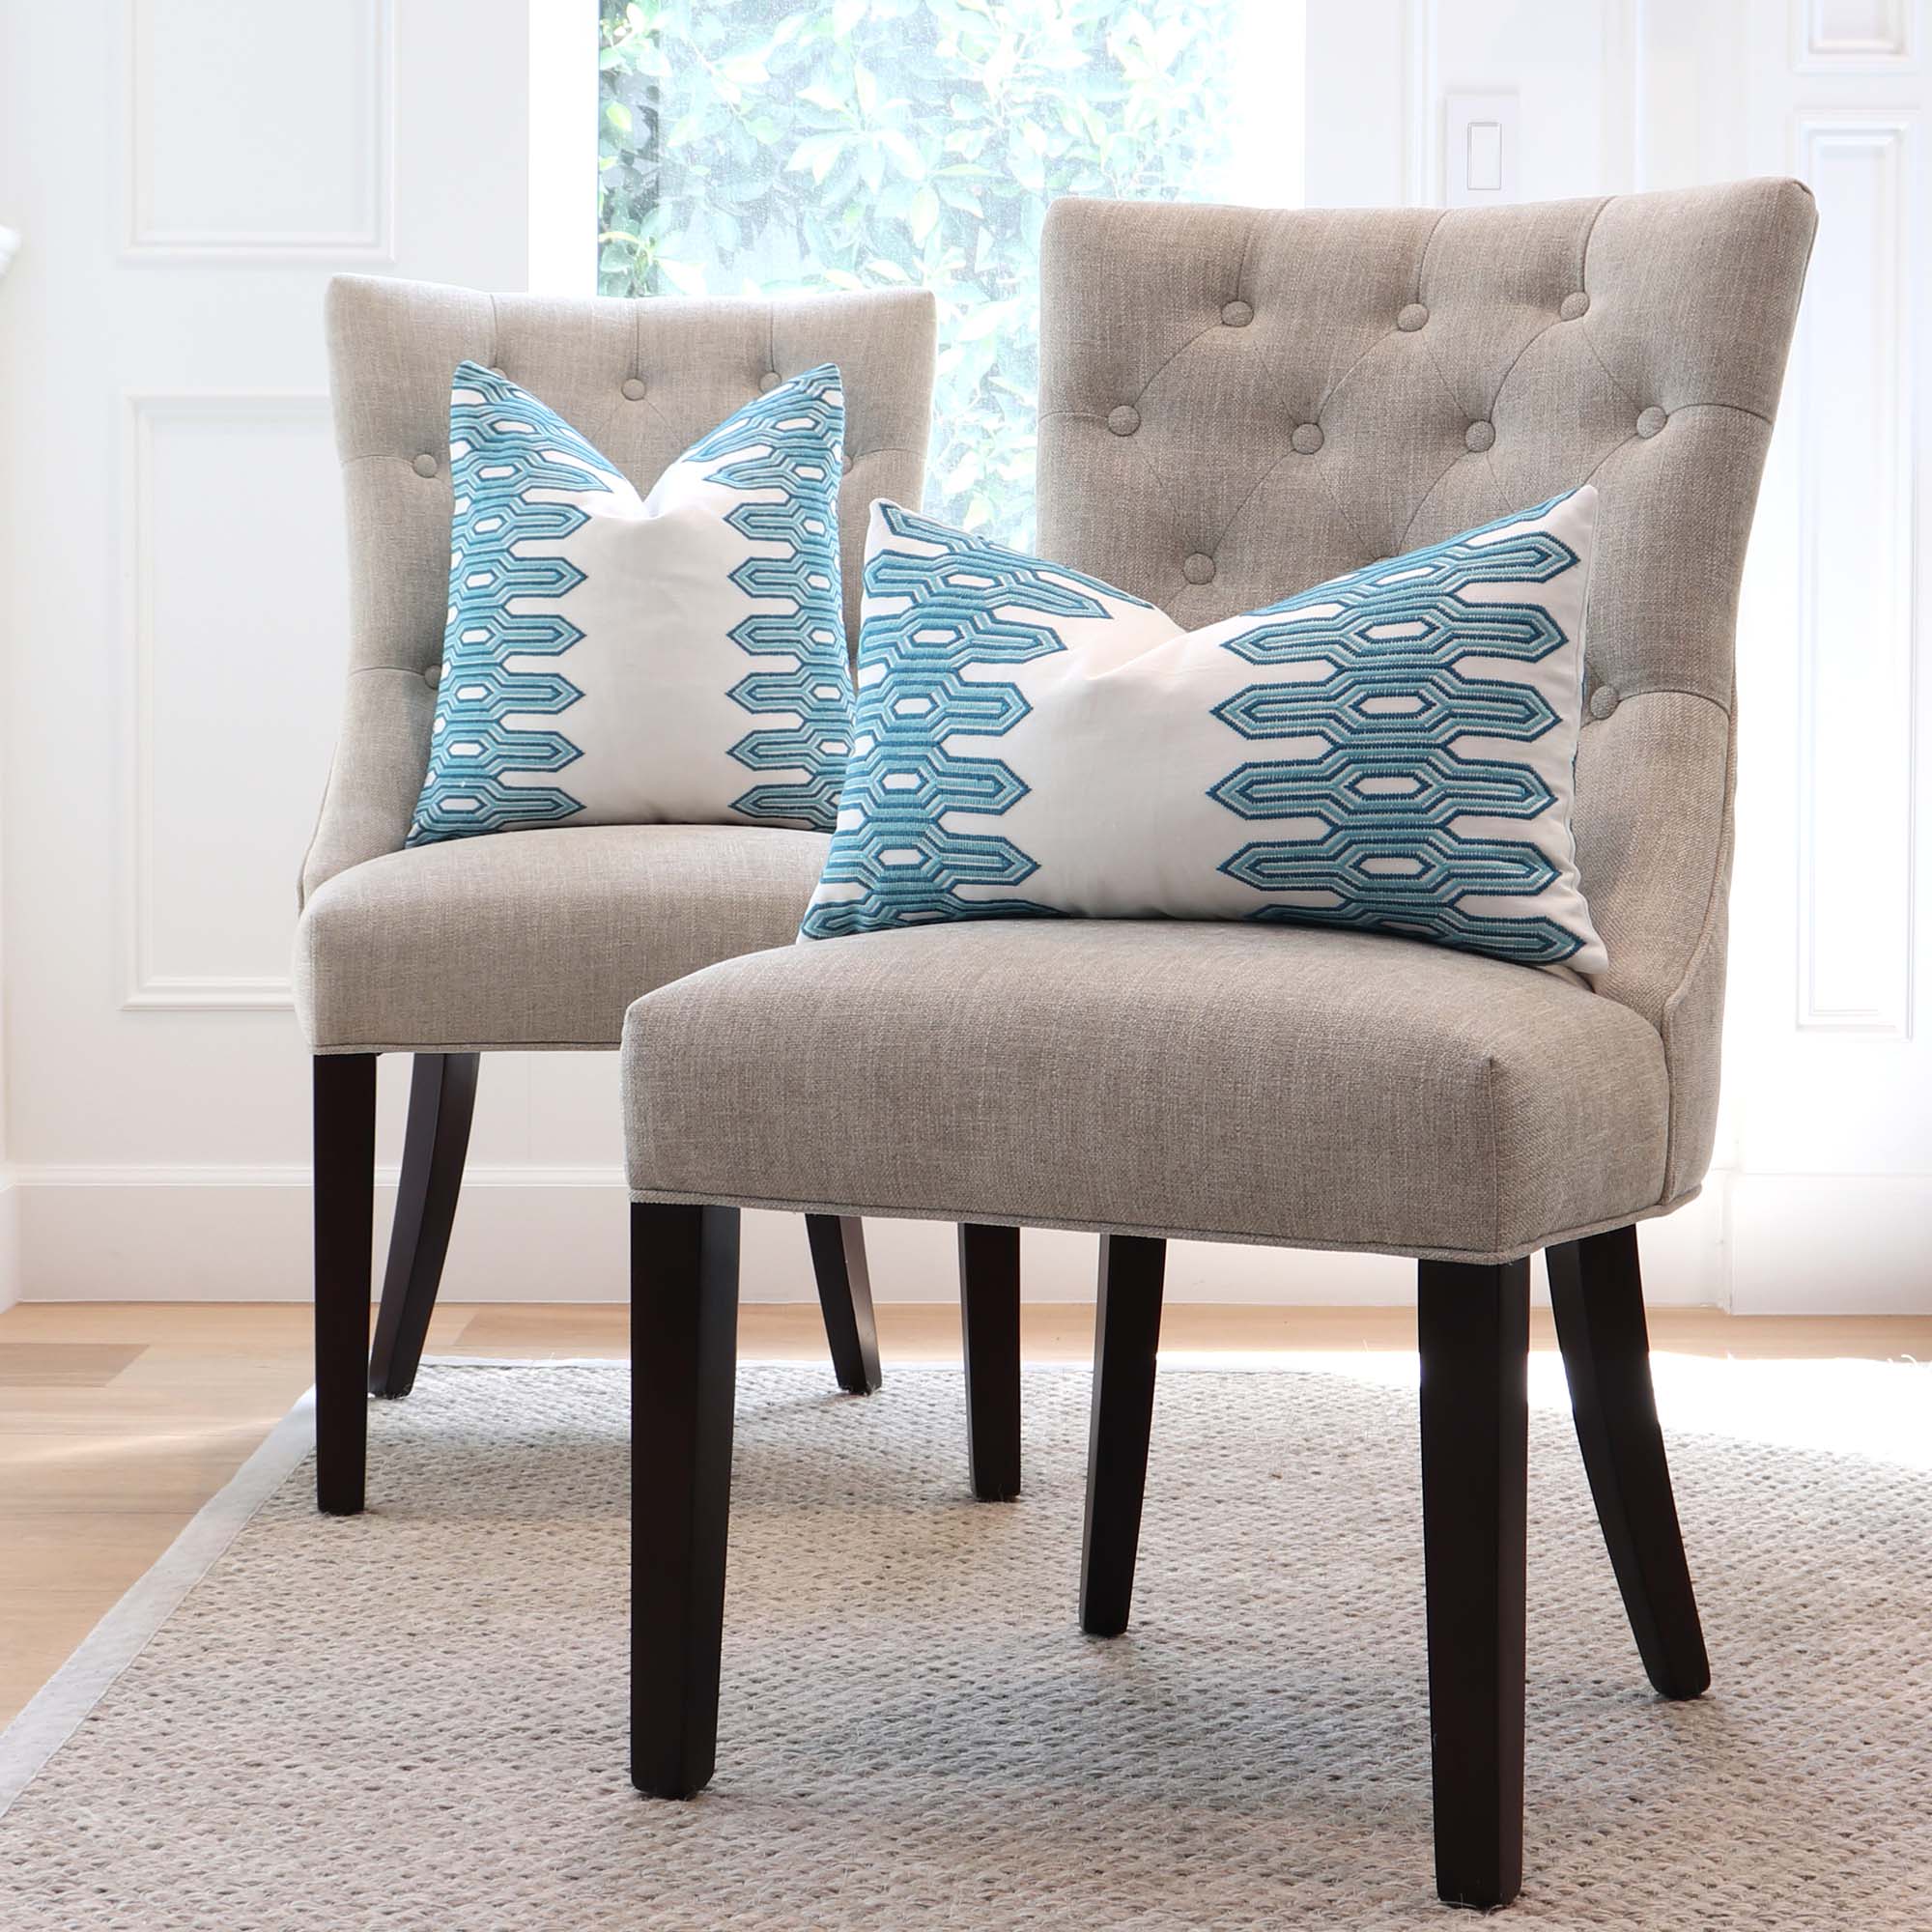 https://www.chloeandolive.com/cdn/shop/products/Thibaut-Nola-Stripe-Embroidery-W720811-Aqua-Blue-Geometric-Designer-Luxury-Decorative-Throw-Pillow-Cover-on-Dining-Chairs-in-Living-Room_2000x.jpg?v=1649393103